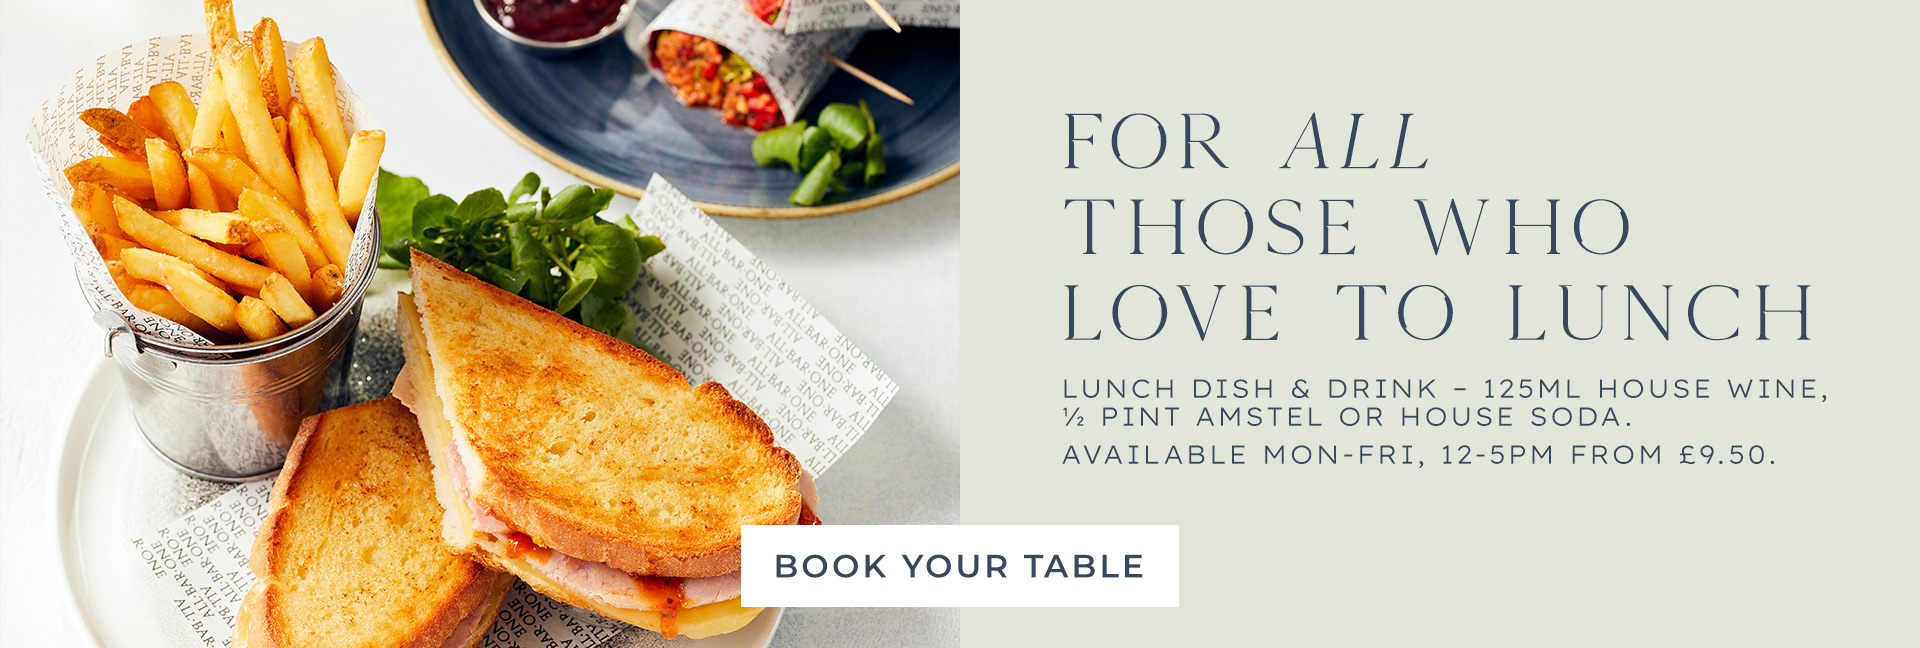 Lunch Offer at All Bar One Liverpool